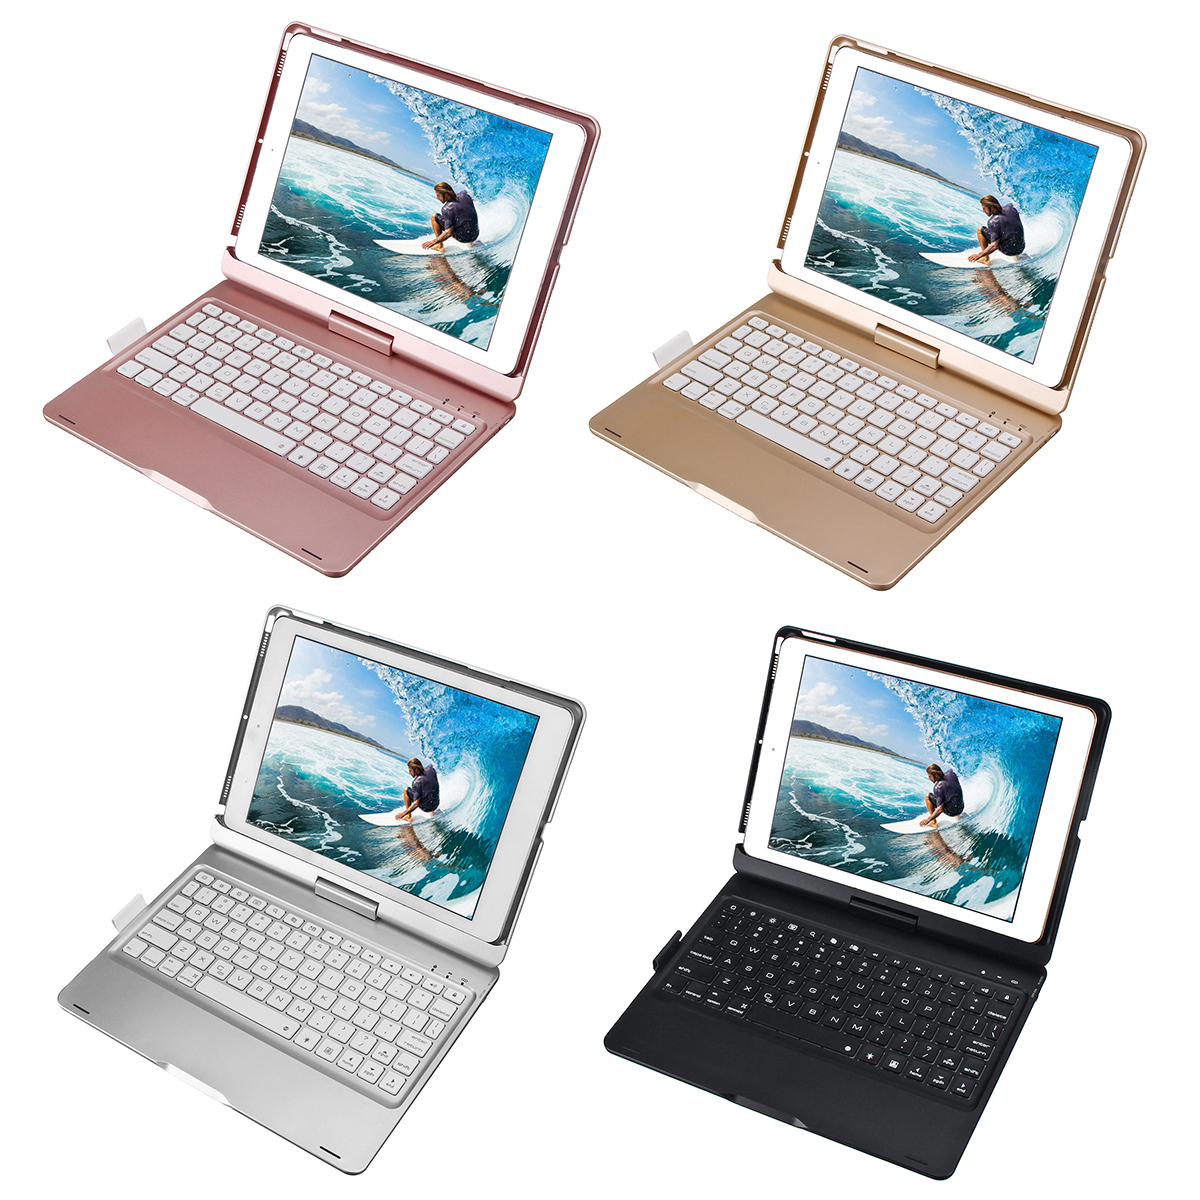 360º Rotation bluetooth Wireless Tablet Keyboard Protective Case With Pencil Holder For iPad Pro 10.5 Inch 2017/iPad Air 10.5 Inch 2019 16